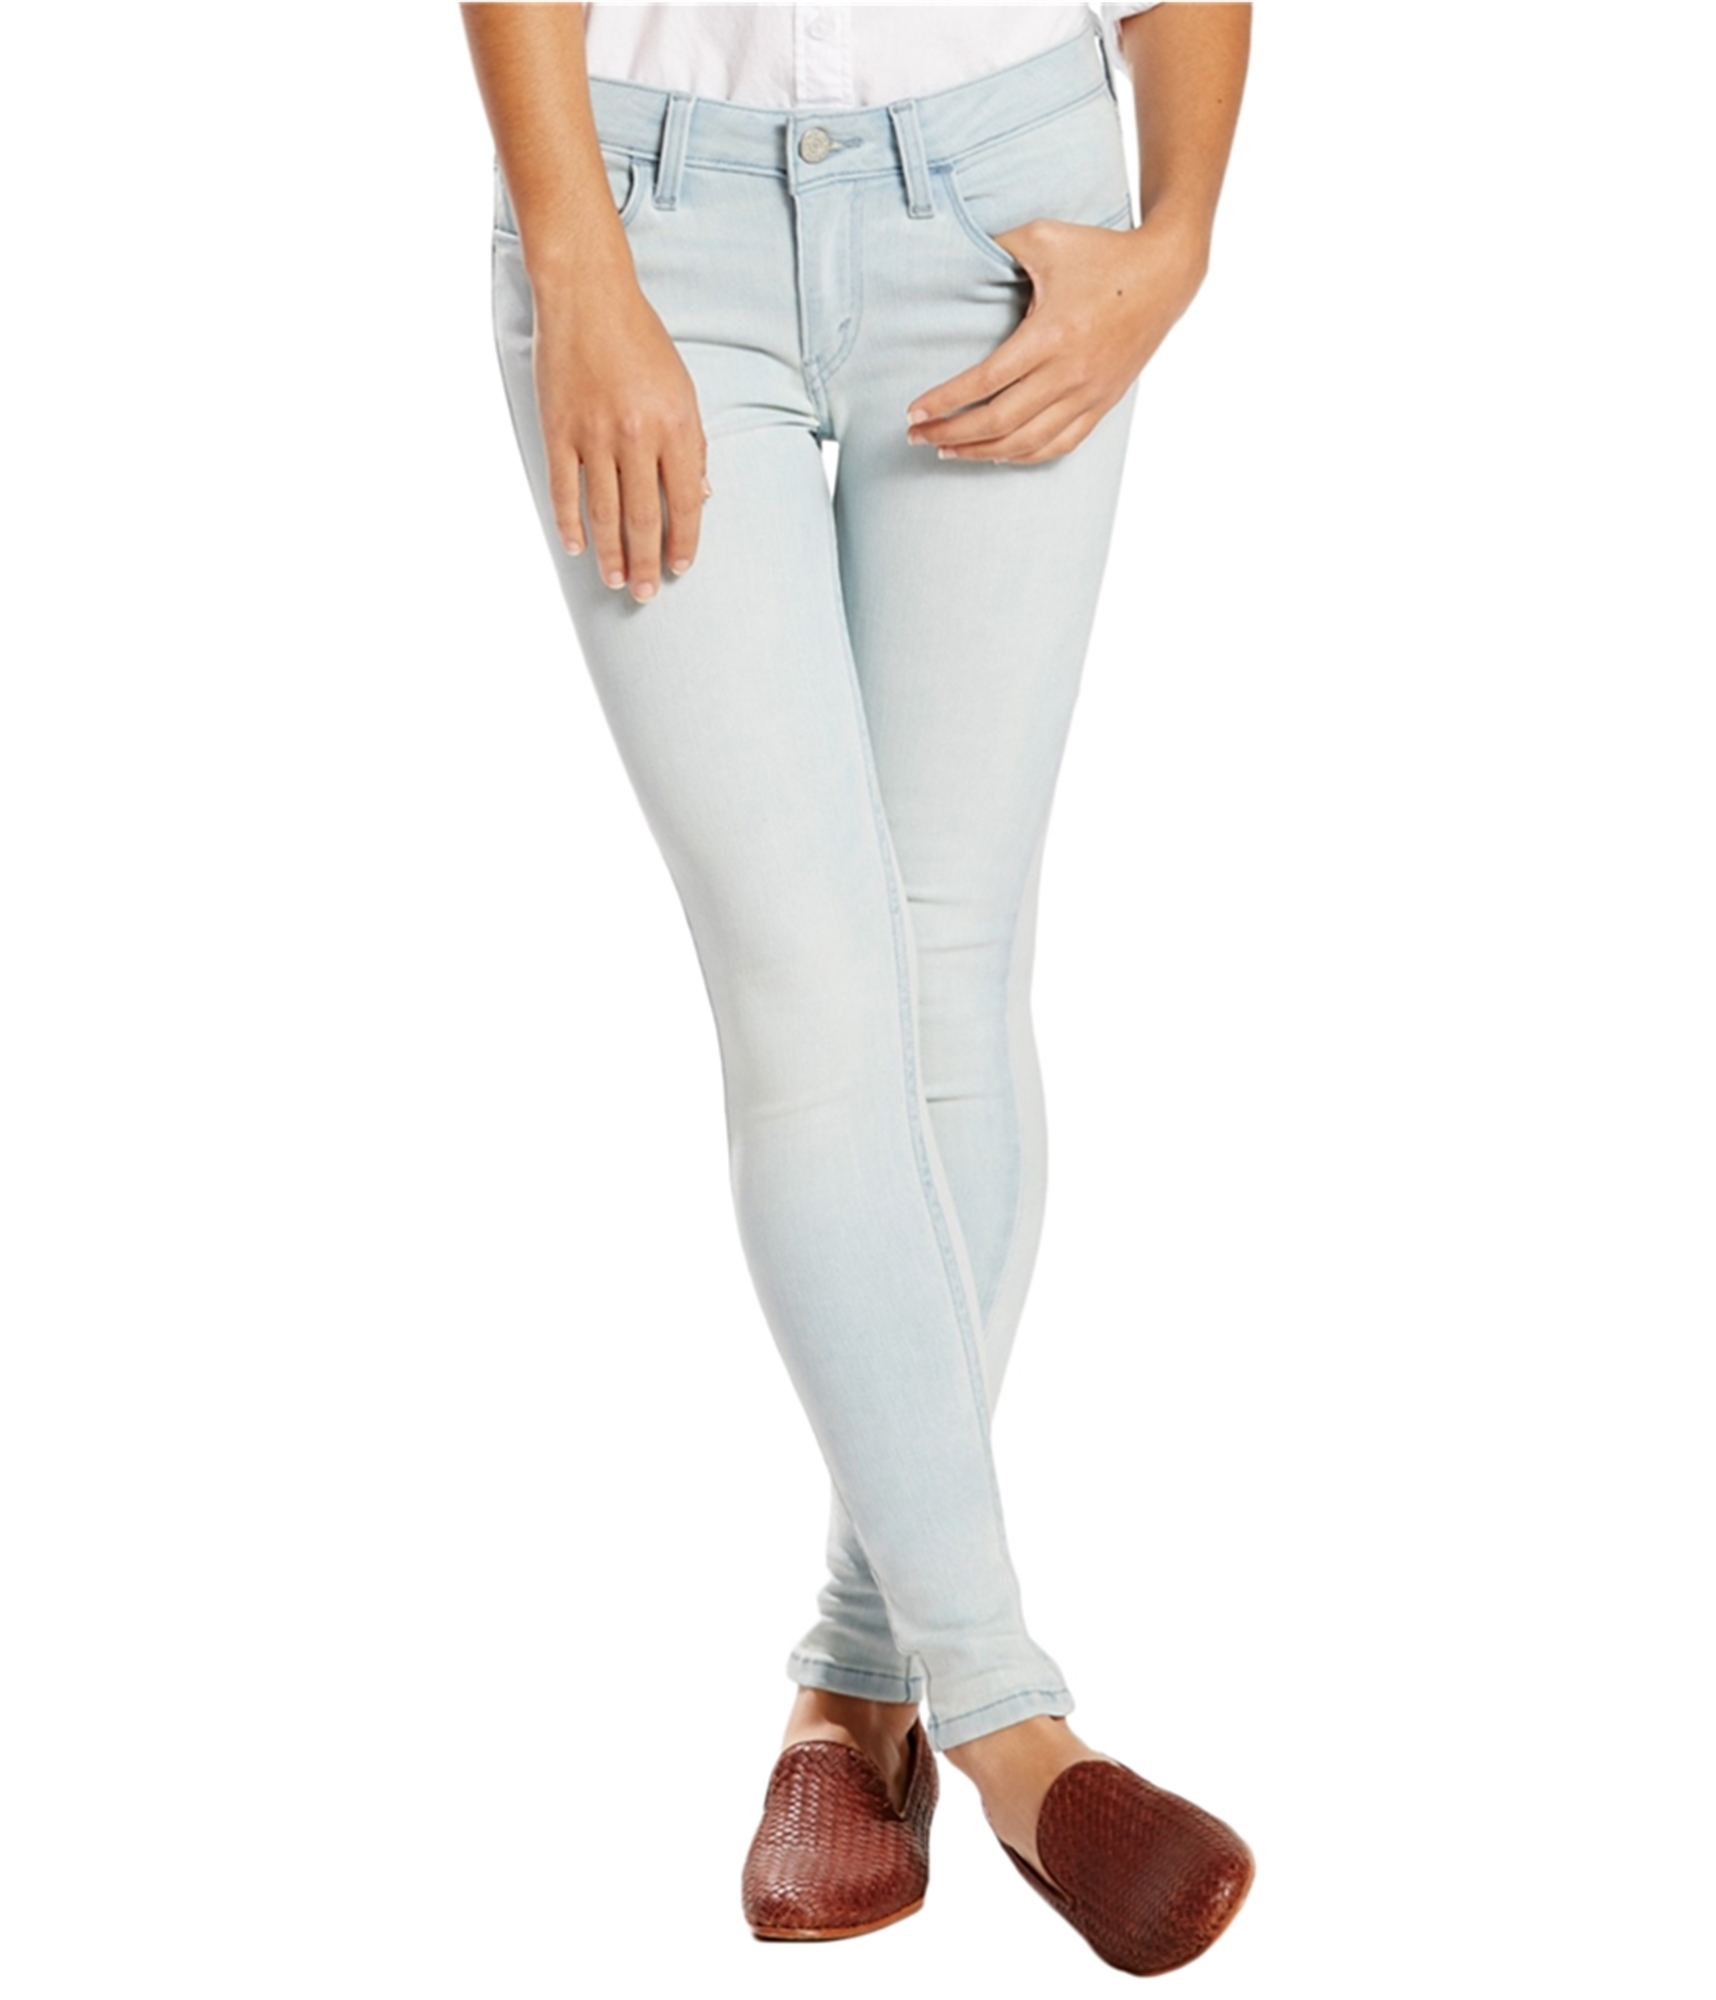 Buy a Womens Levi's 535 Skinny Fit Jeans Online 